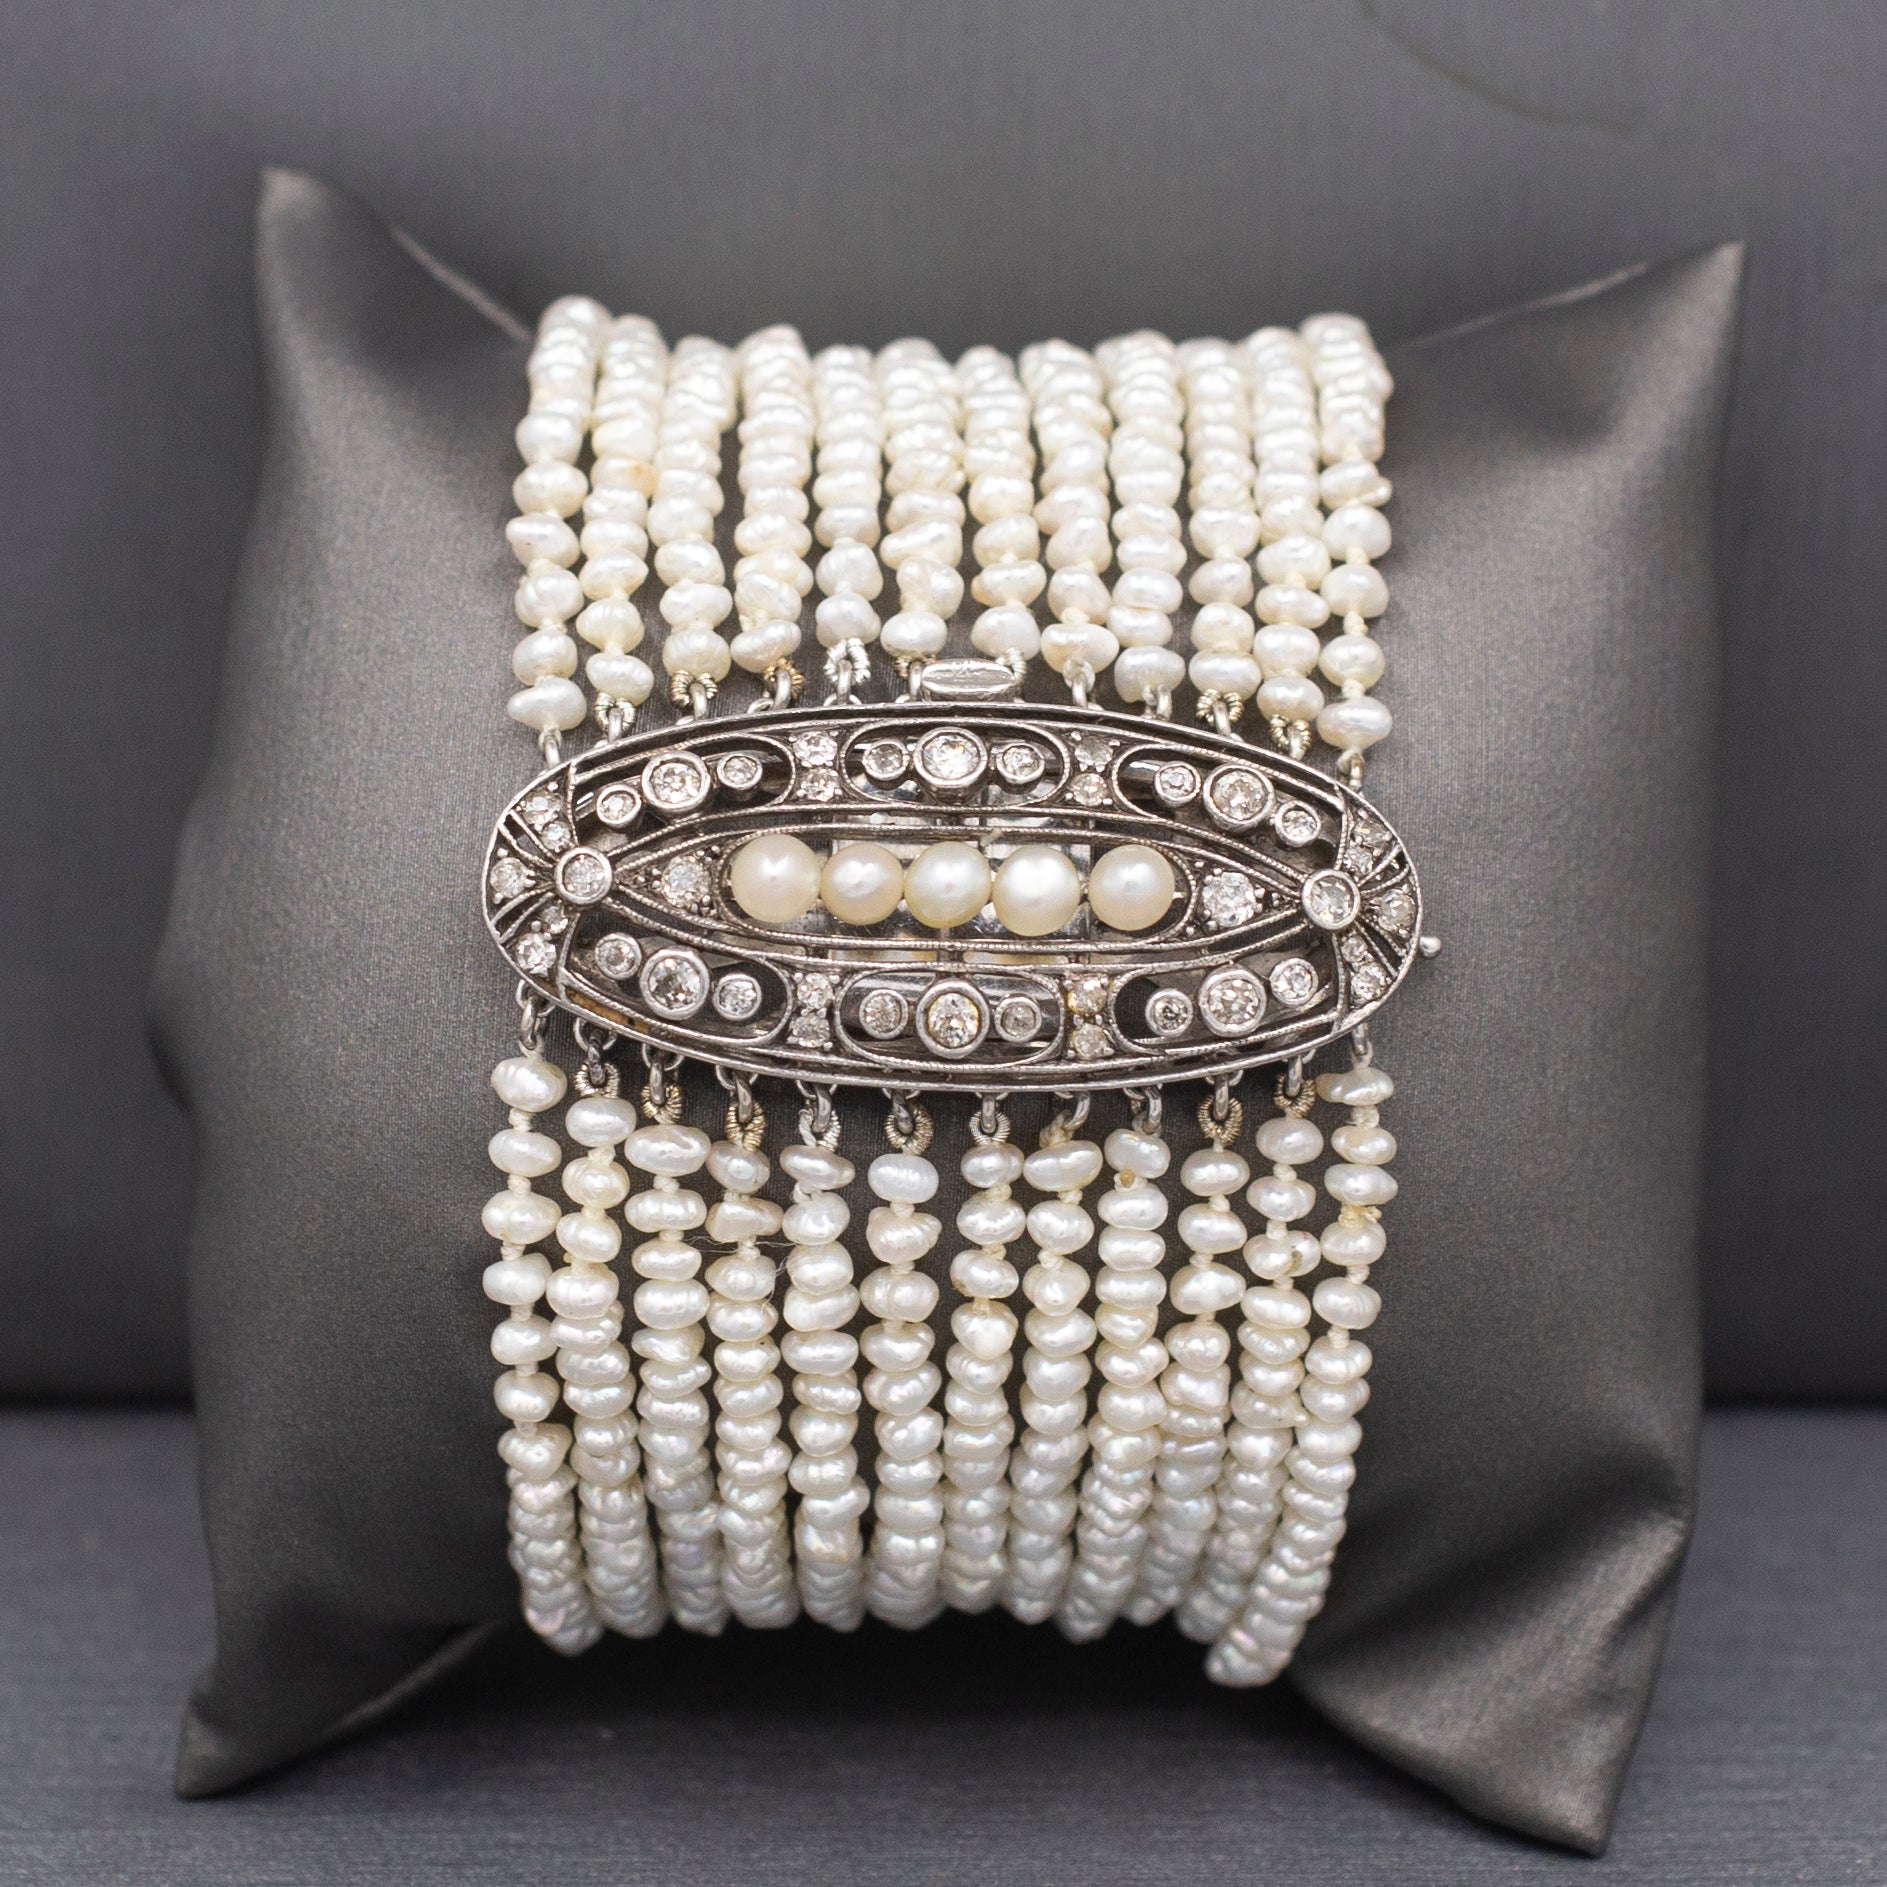 Exquisite Antique Victorian 12 Row Pearl and Old European Cut Diamond Bracelet Size Extra-Small